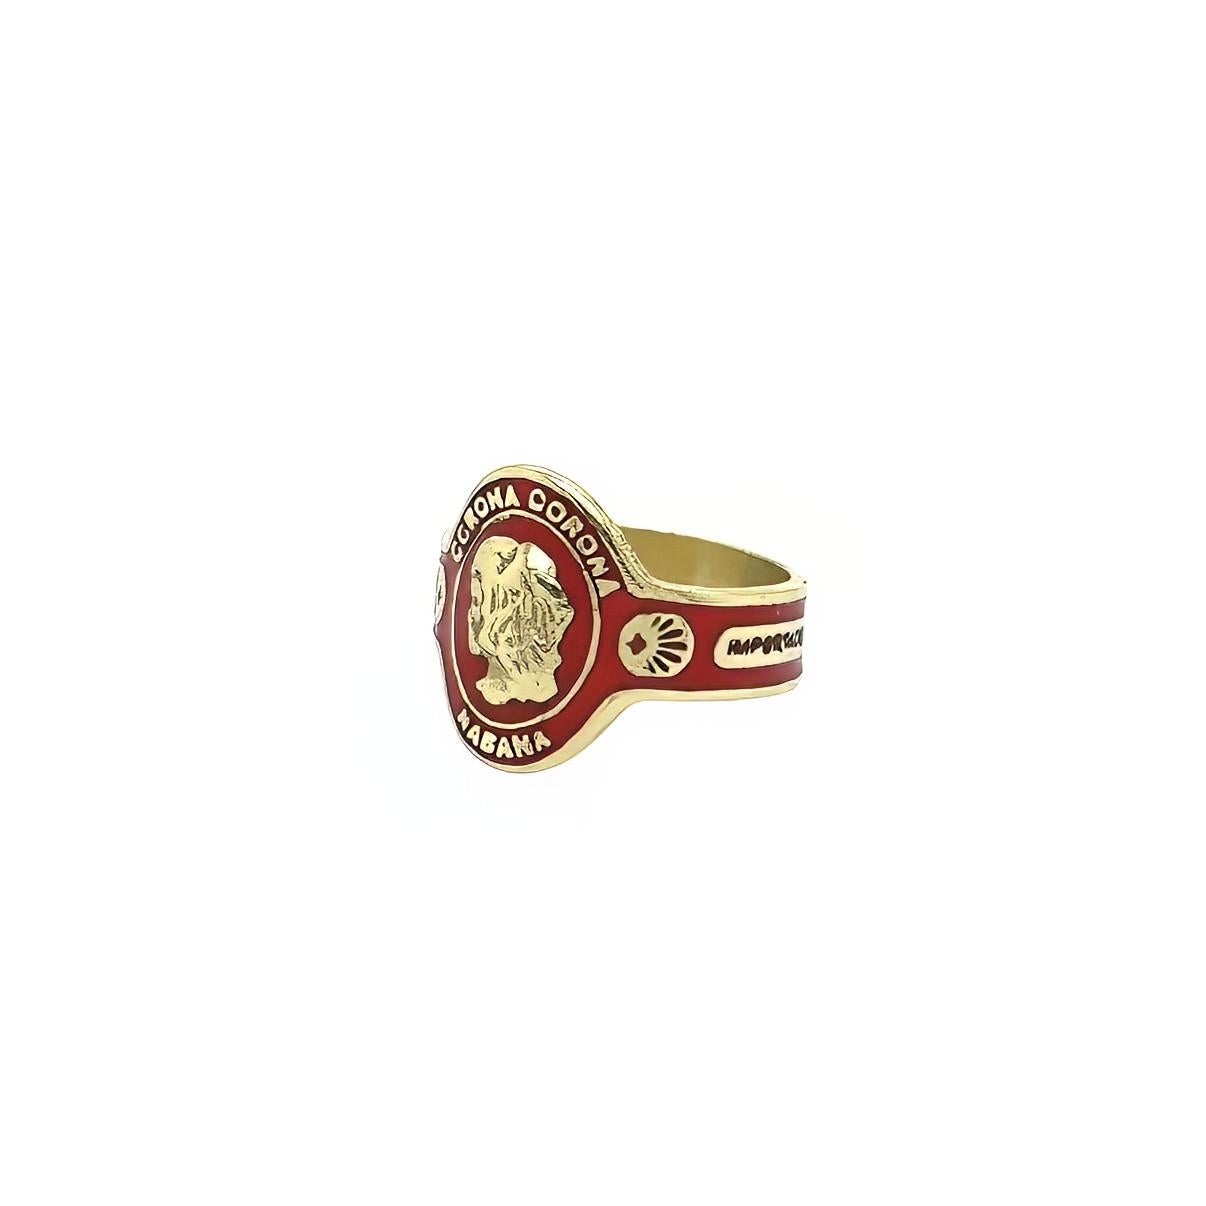 An 18 karat yellow gold and enamel ring, Cartier.  Designed as a cigar band highlighted with red enamel centering the head of a girl in profile and labeled Corona, Havana, Importado.  Size approximately 7.  Gross weight approximately 7.30 grams. 